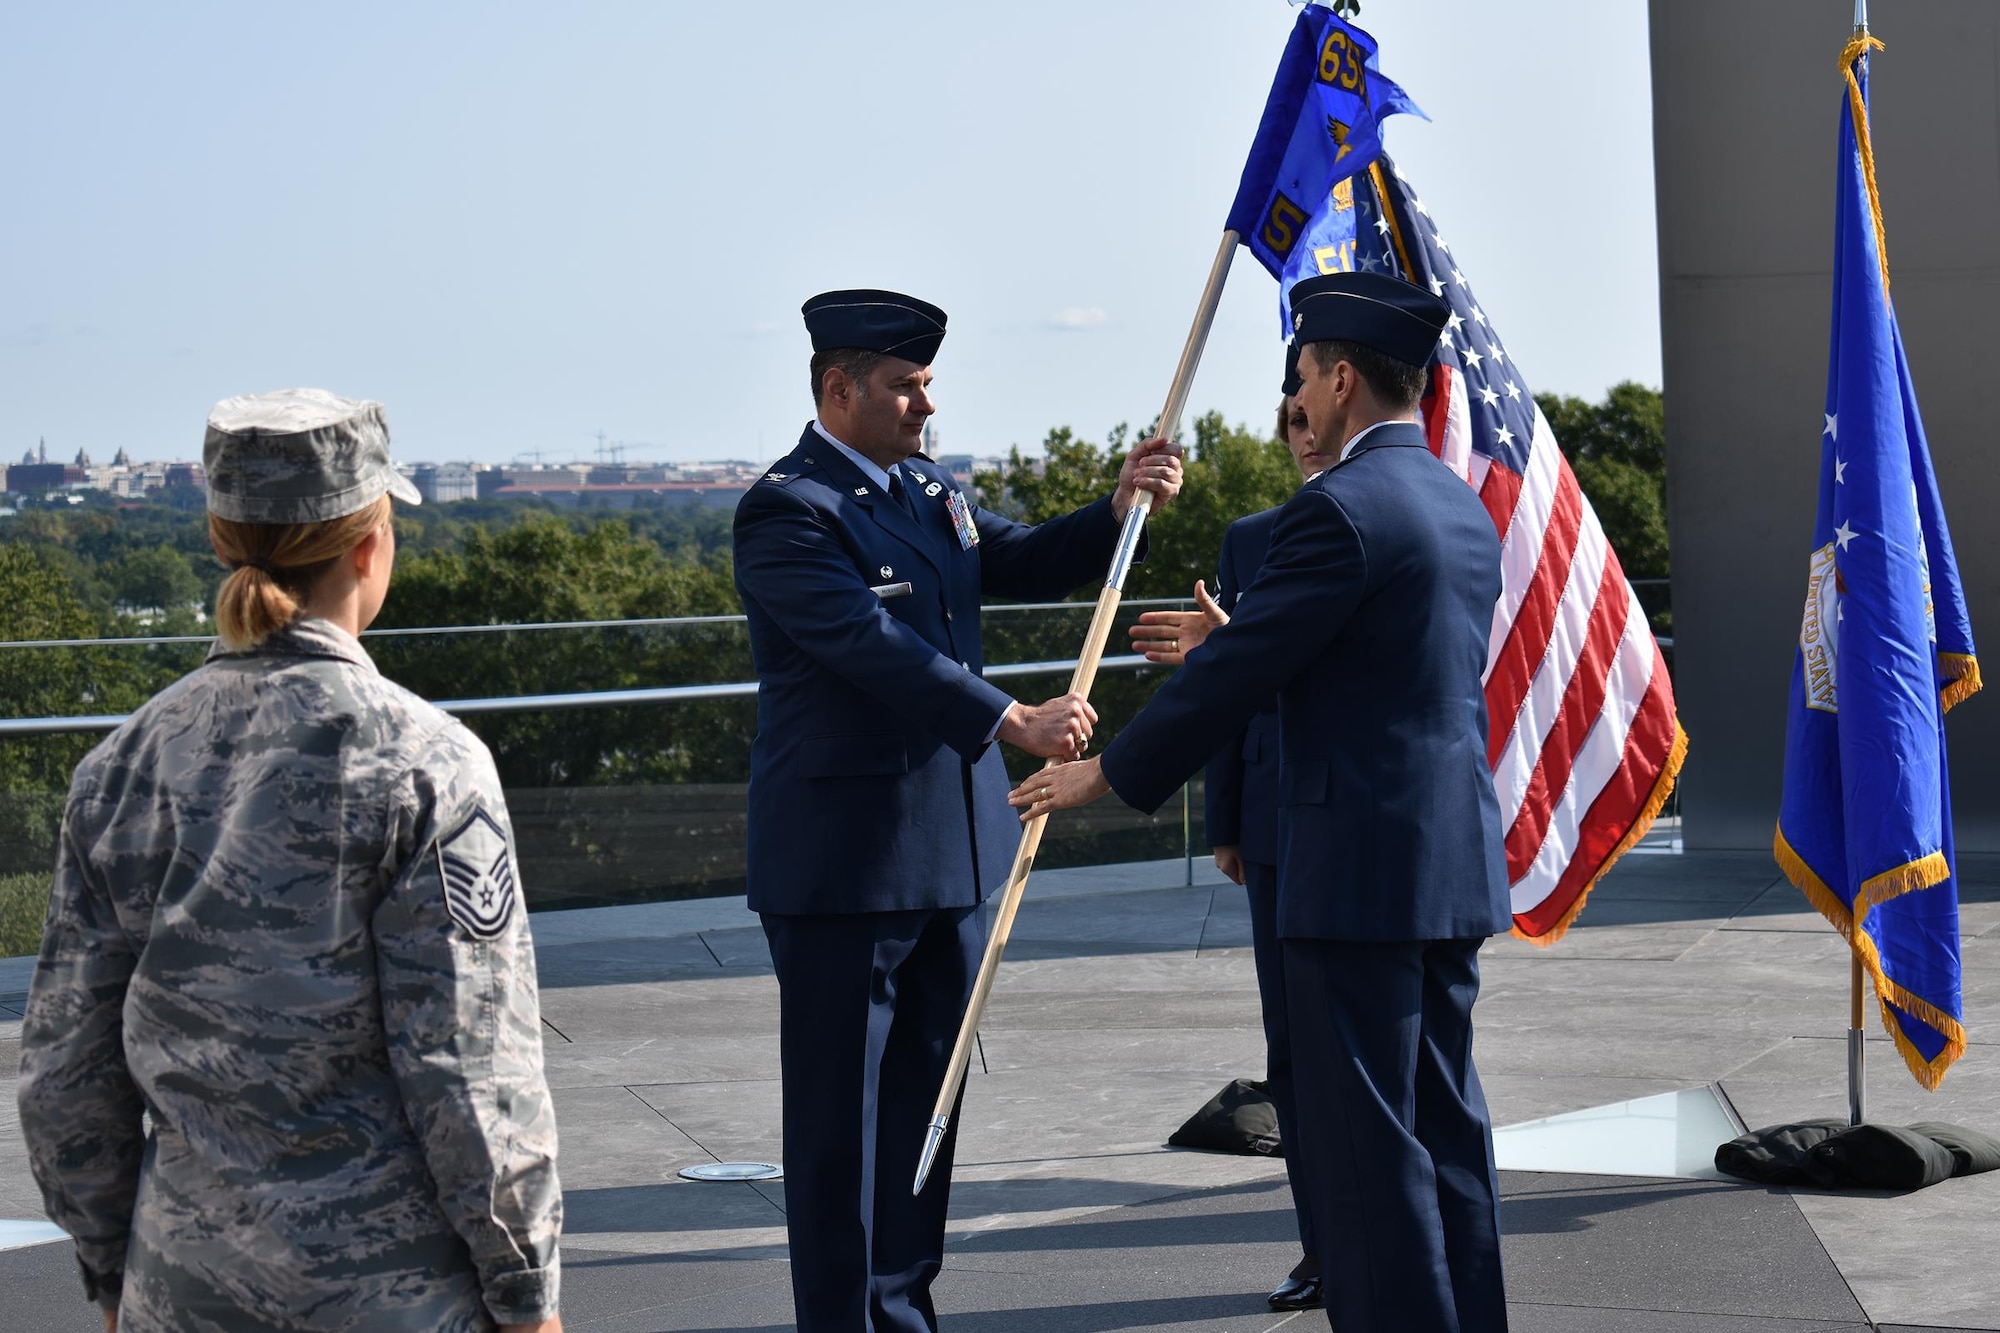 Lt. Col. Todd A. Borzych (right) assumes command of the 512th Cyber Intelligence Squadron,  655th Intelligence, Surveillance and Reconnaissance Group, by accepting the squadron flag from Col. John D. McKaye, 655th ISRG commander, during a formal ceremony September 10, 2017, at the Air Force Memorial in Arlington, Virginia. The 512th IS officially activated on September 2, 2017 along with the 655th ISRG 23rd IS (Cyber), Texas, and 820th IS (Targeting), Nebraska. (U.S. Air Force photo by Maj. John T. Stamm)